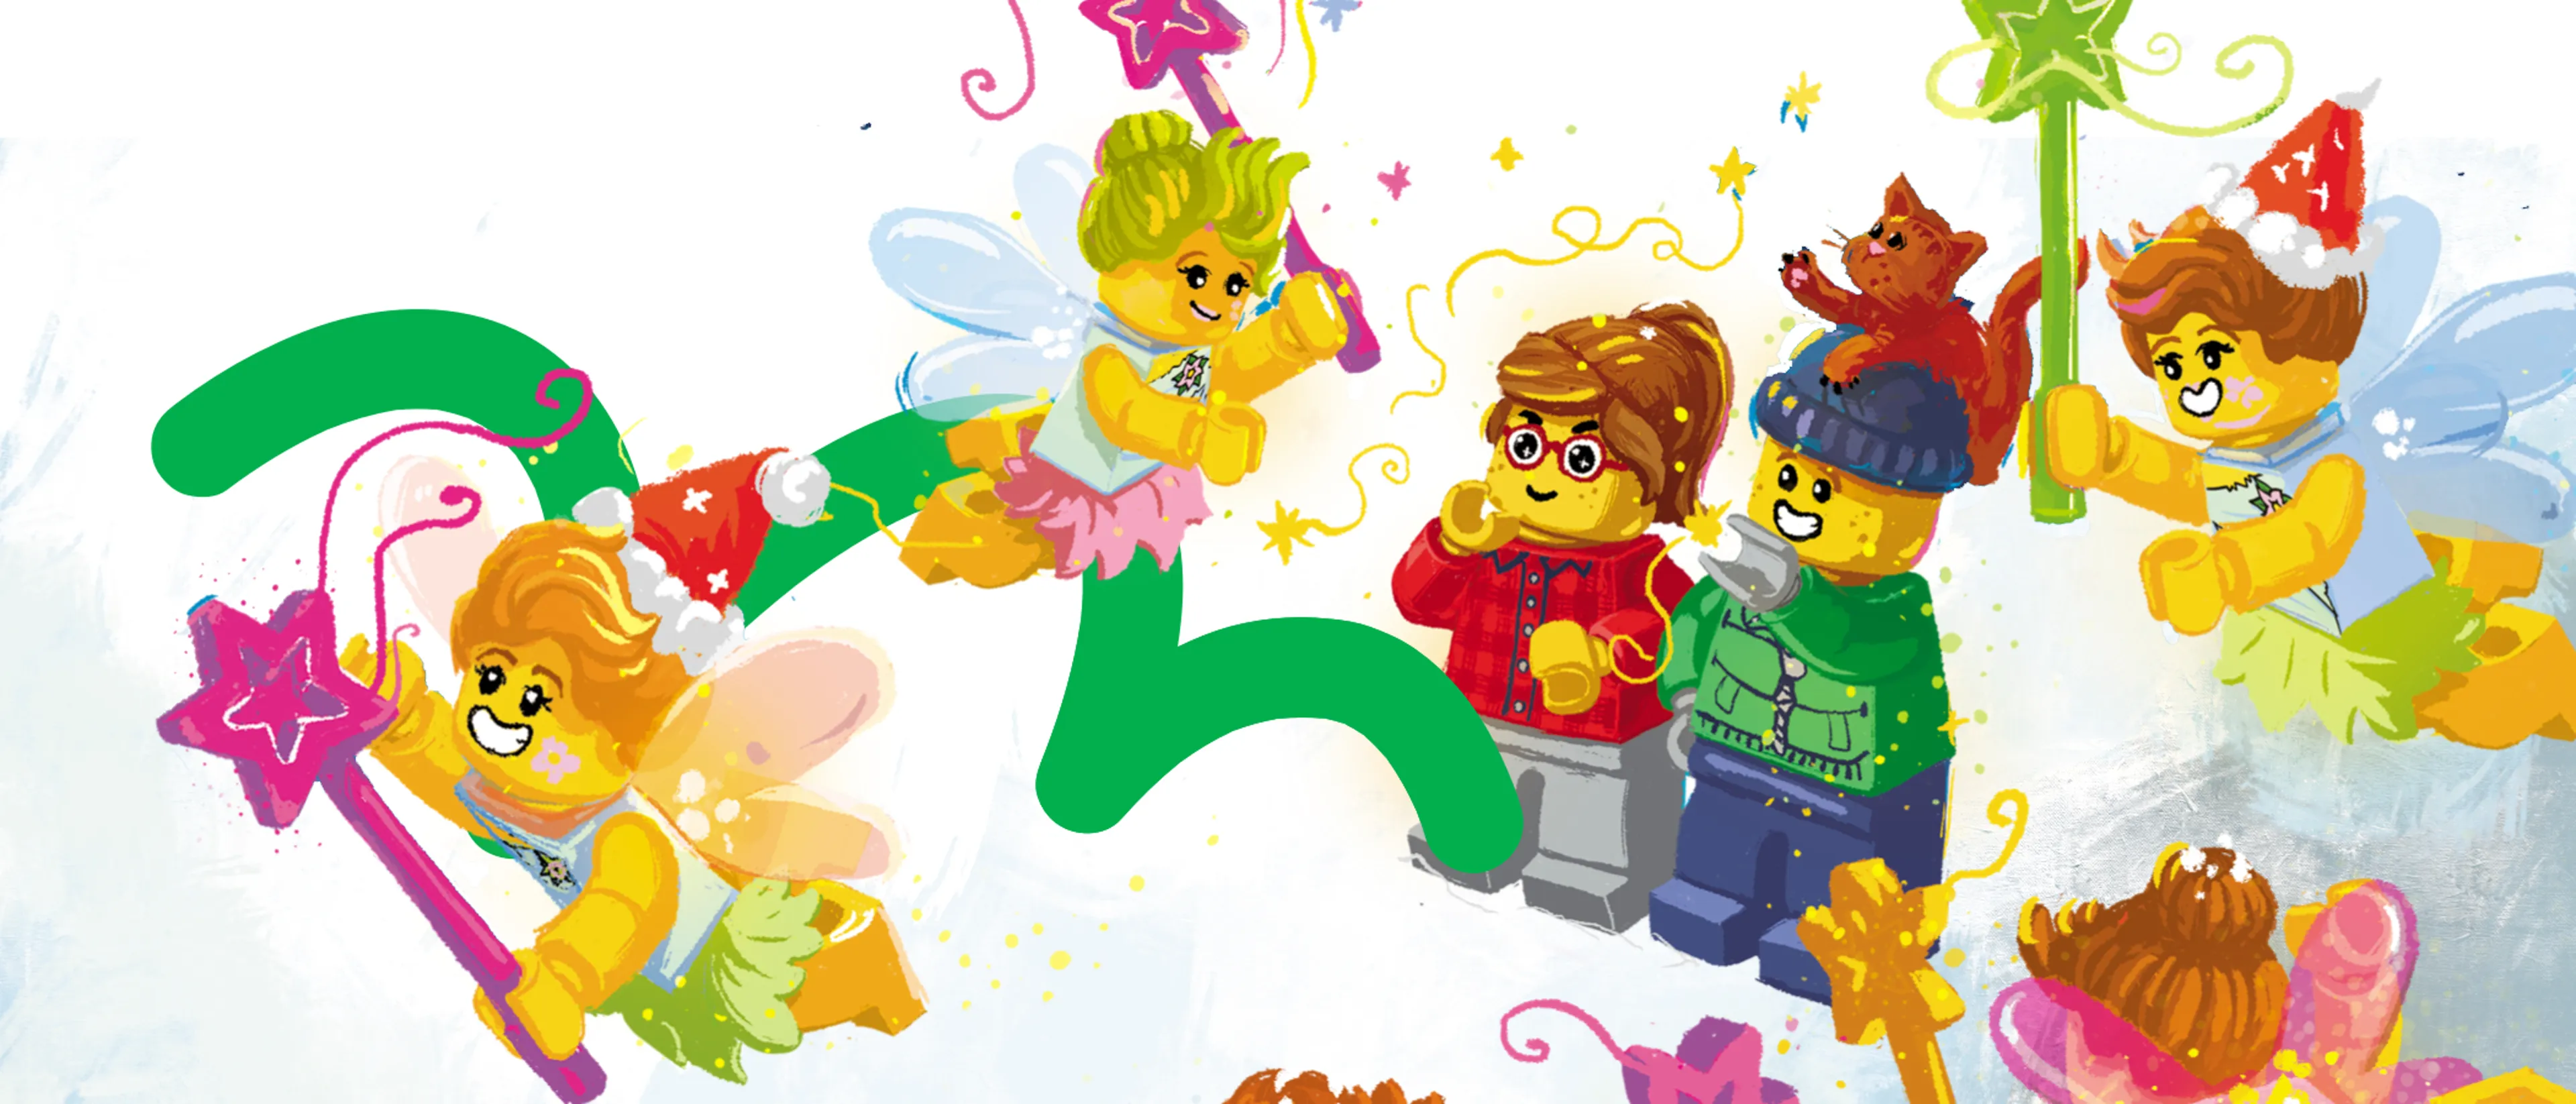 Two minifigure friends looking at minifigure fairies